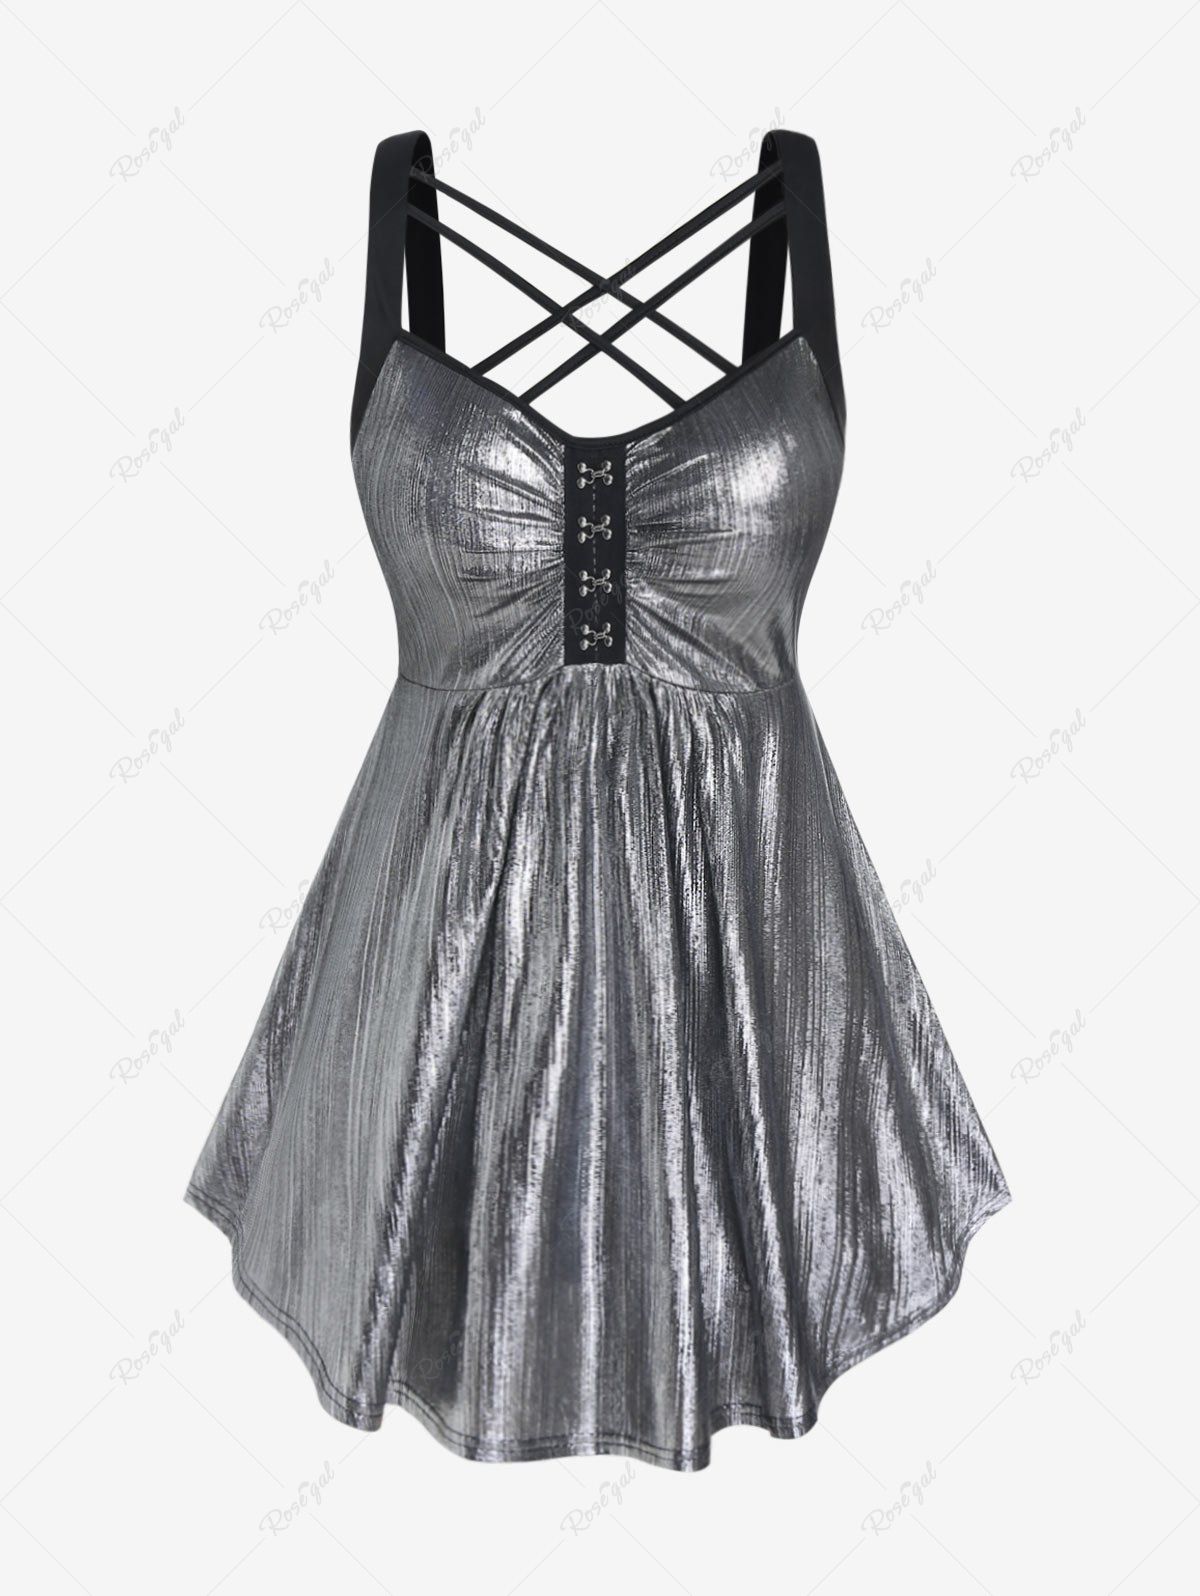 Shop Plus Size Crisscross Strappy Backless Metal Tunic Top  